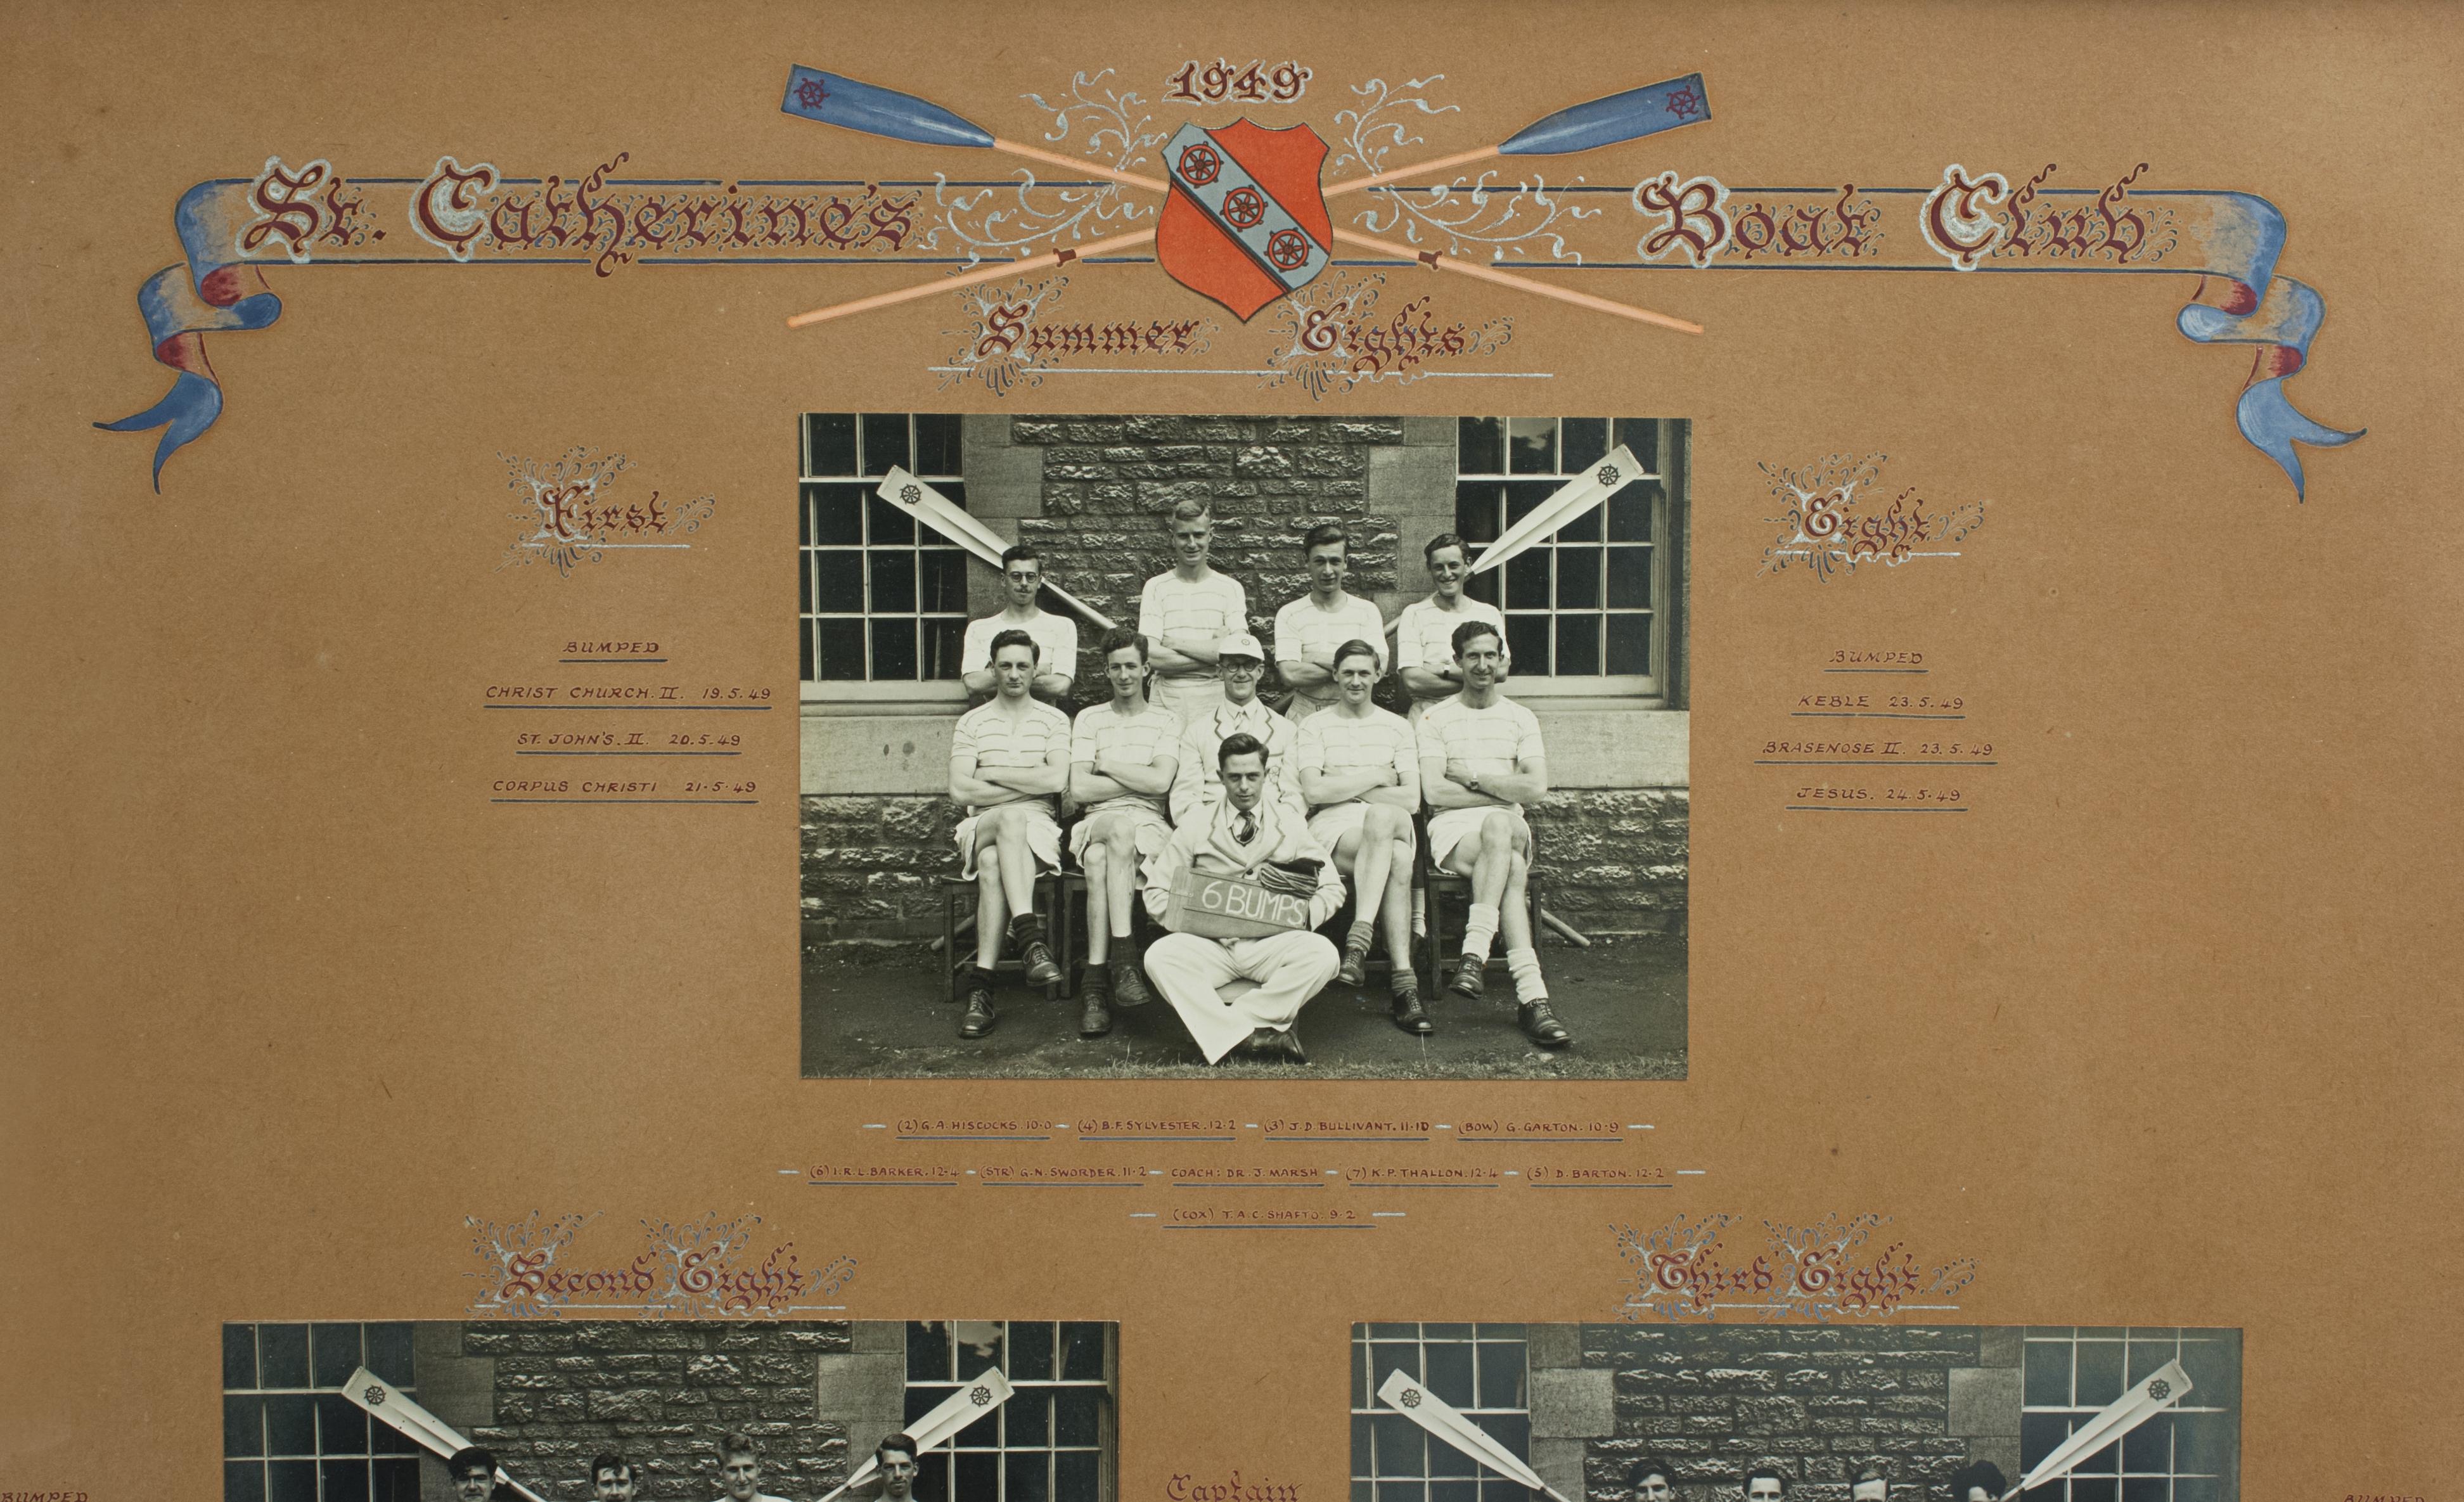 Wood St Catharine's College Commemorative Rudder and Team Photo, Oxford University